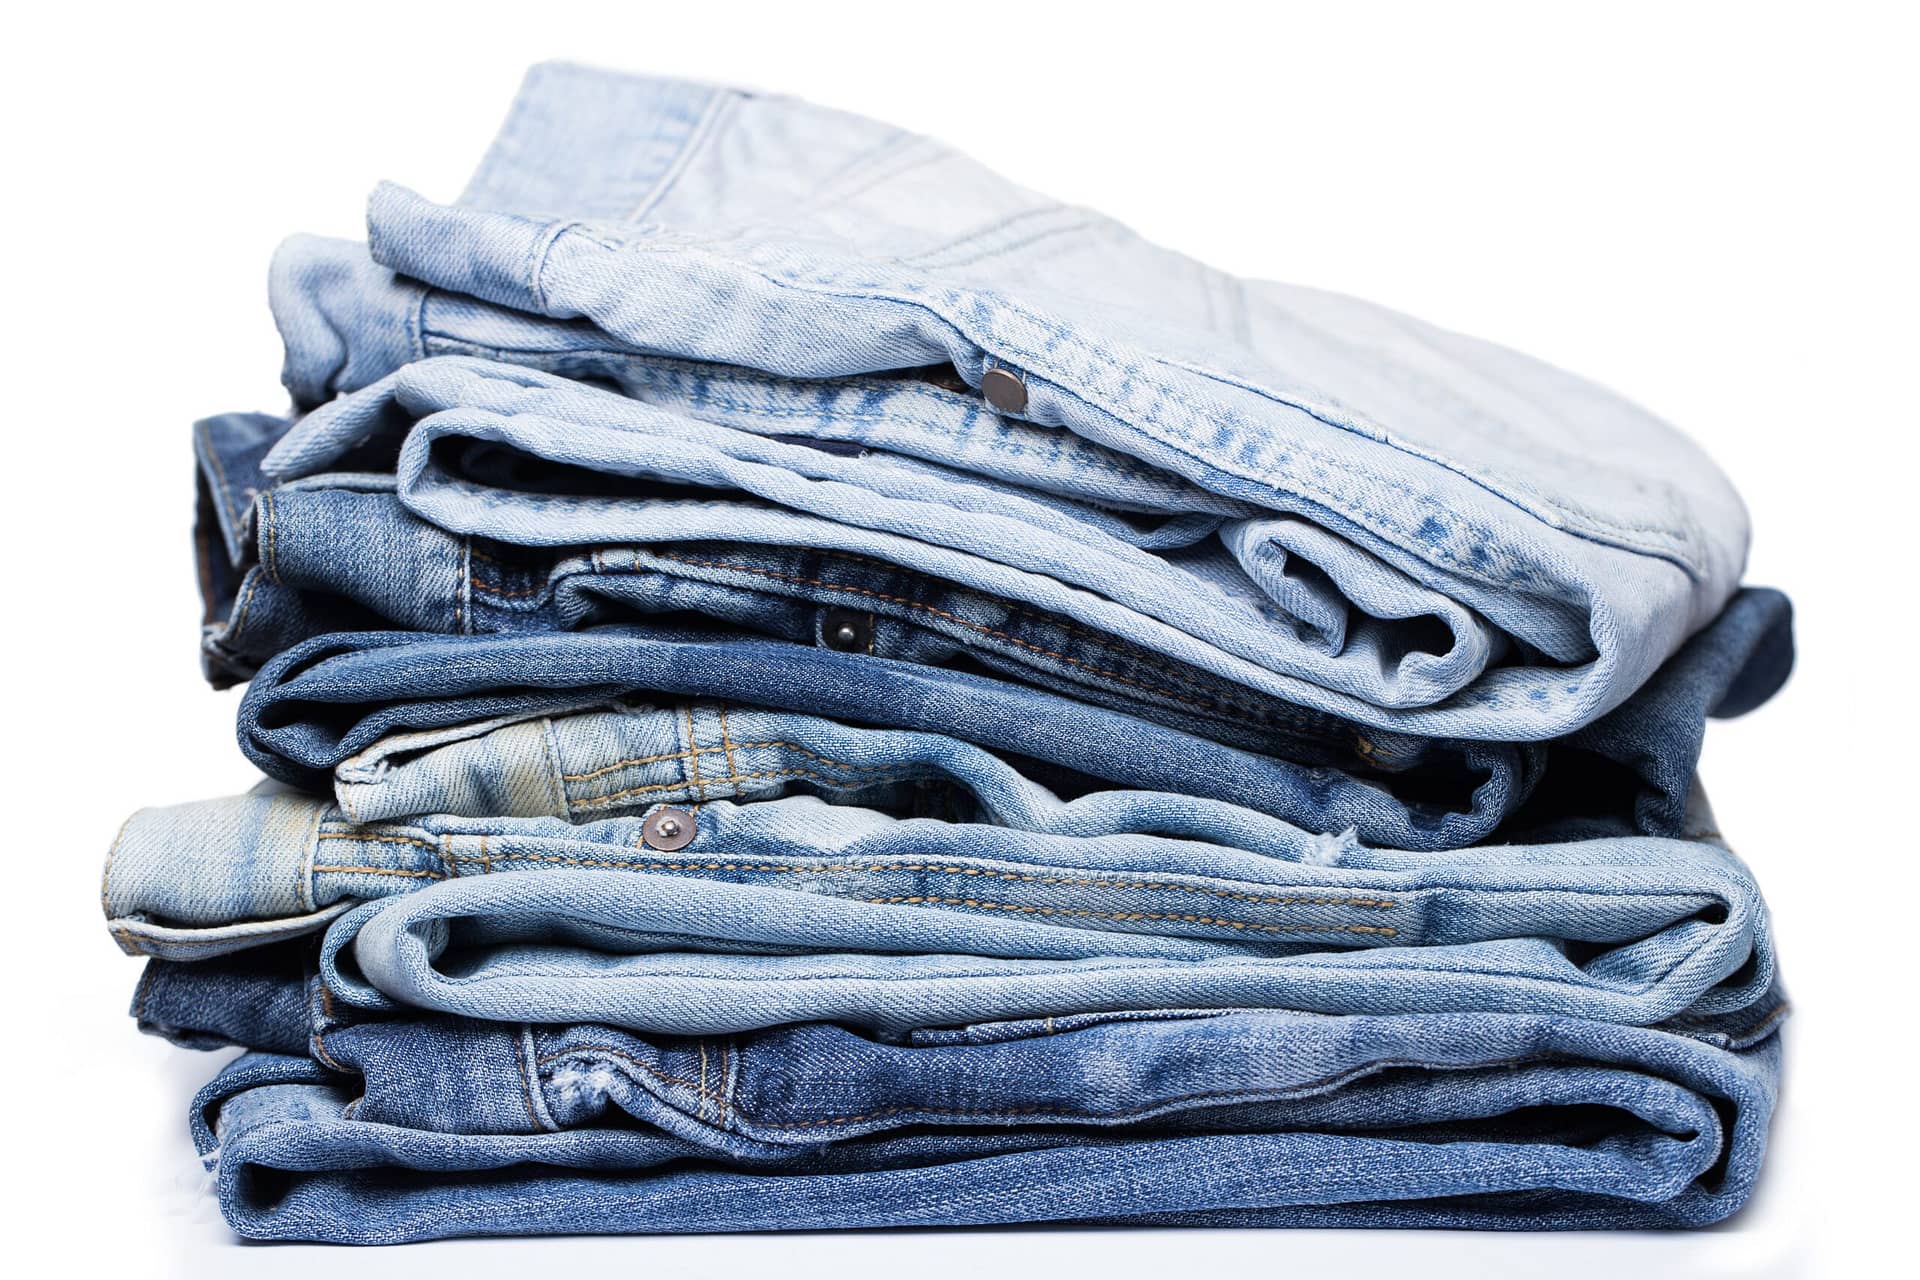 Give Your Old Jeans a New Lease of Life – 5 Creative ways to Upcycle and Revamp